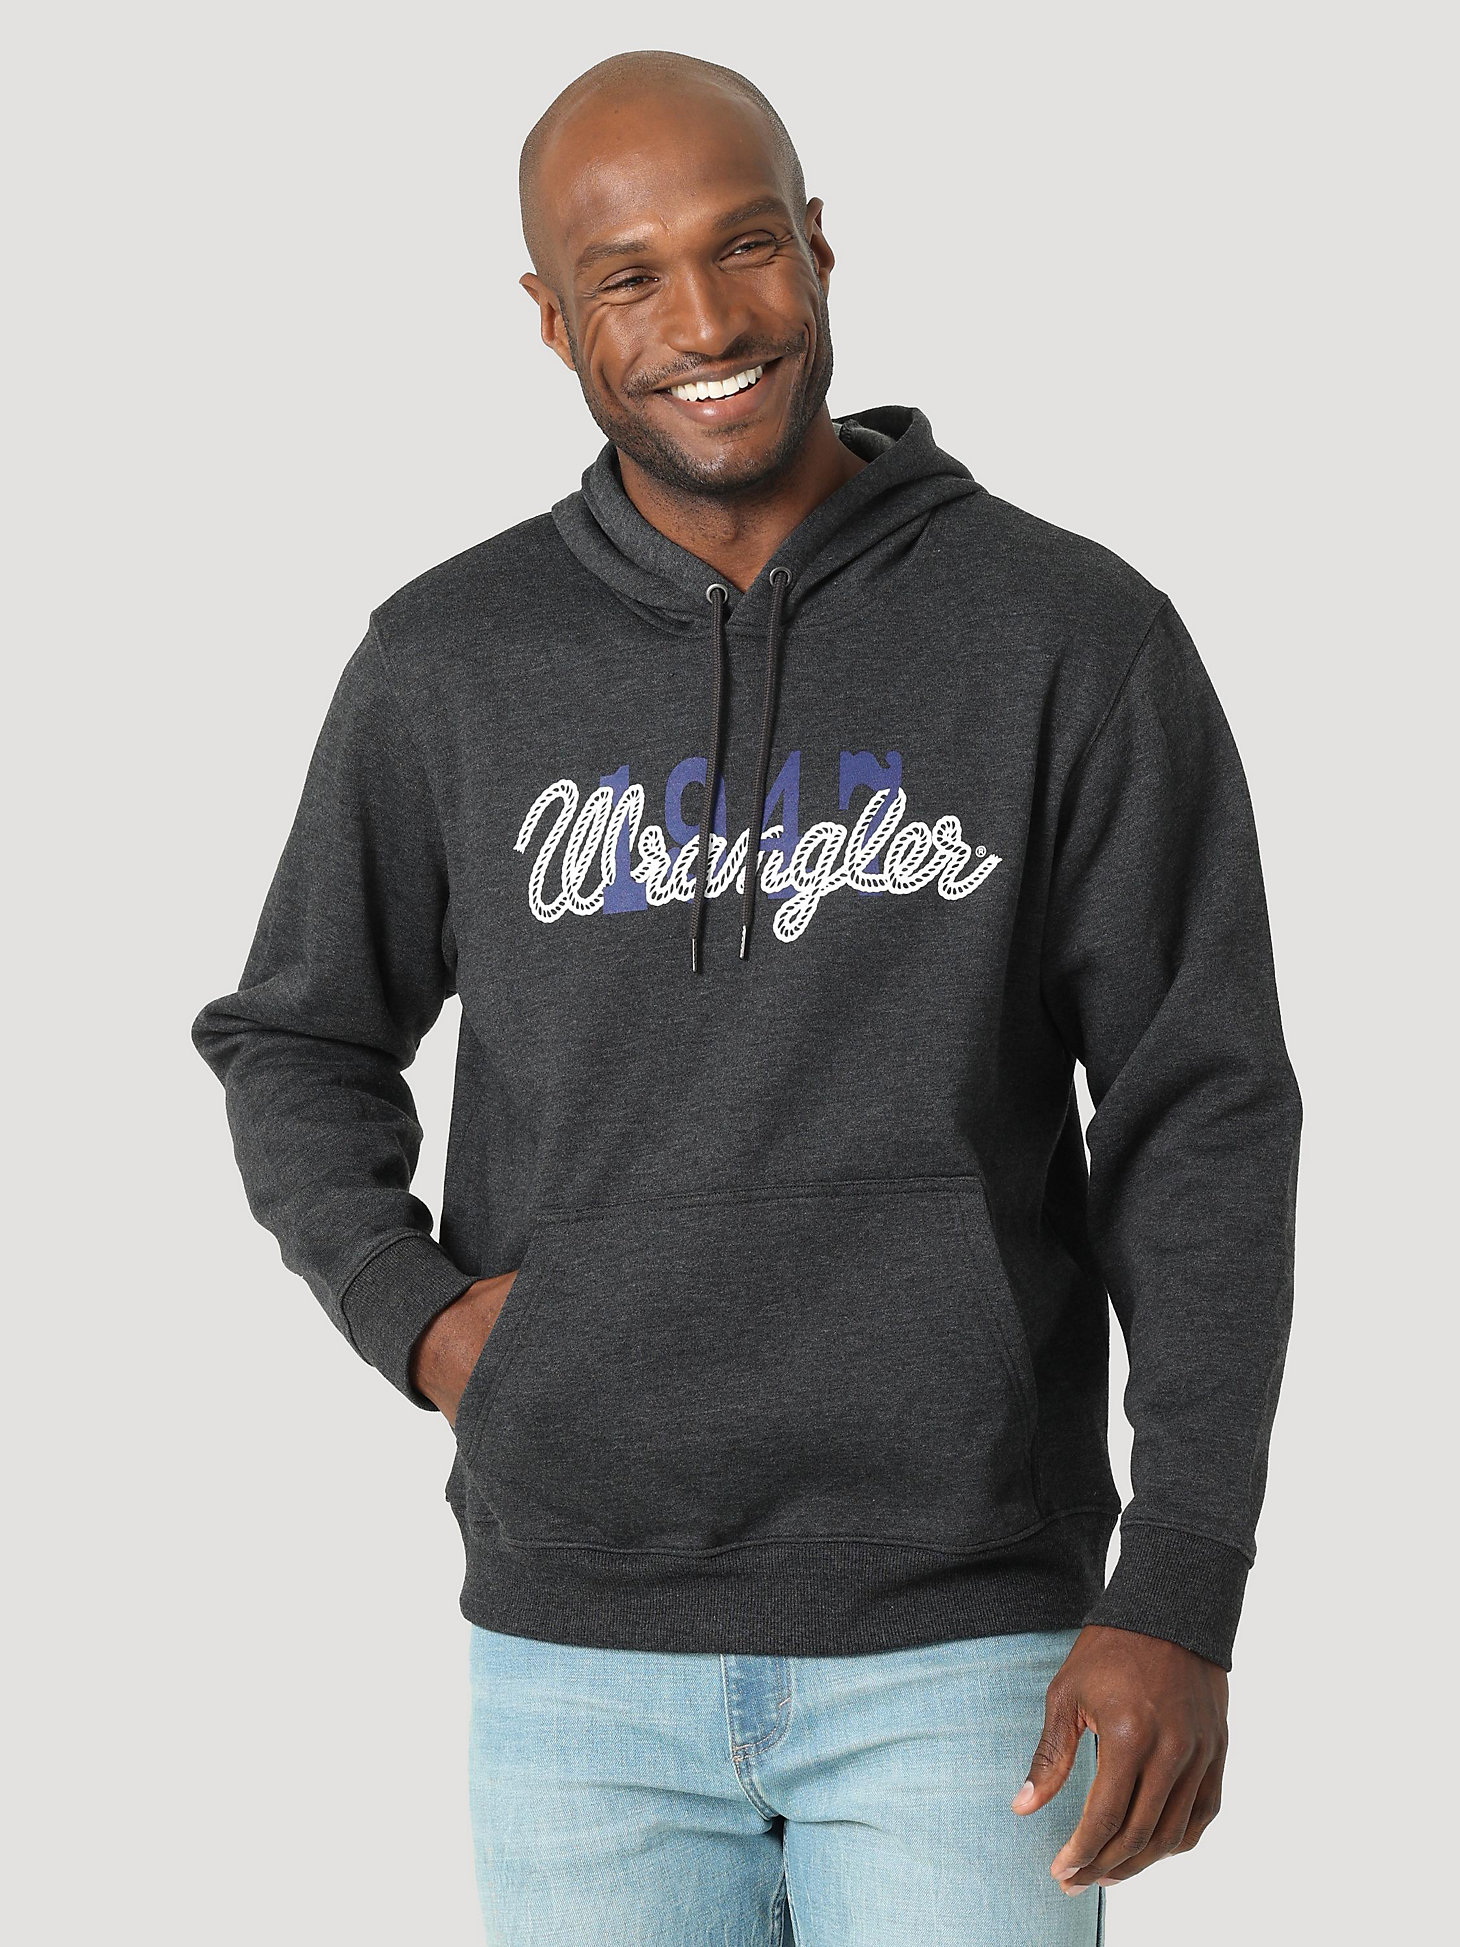 Men's 1947 Wrangler Logo Pullover Hoodie in Charcoal Heather main view